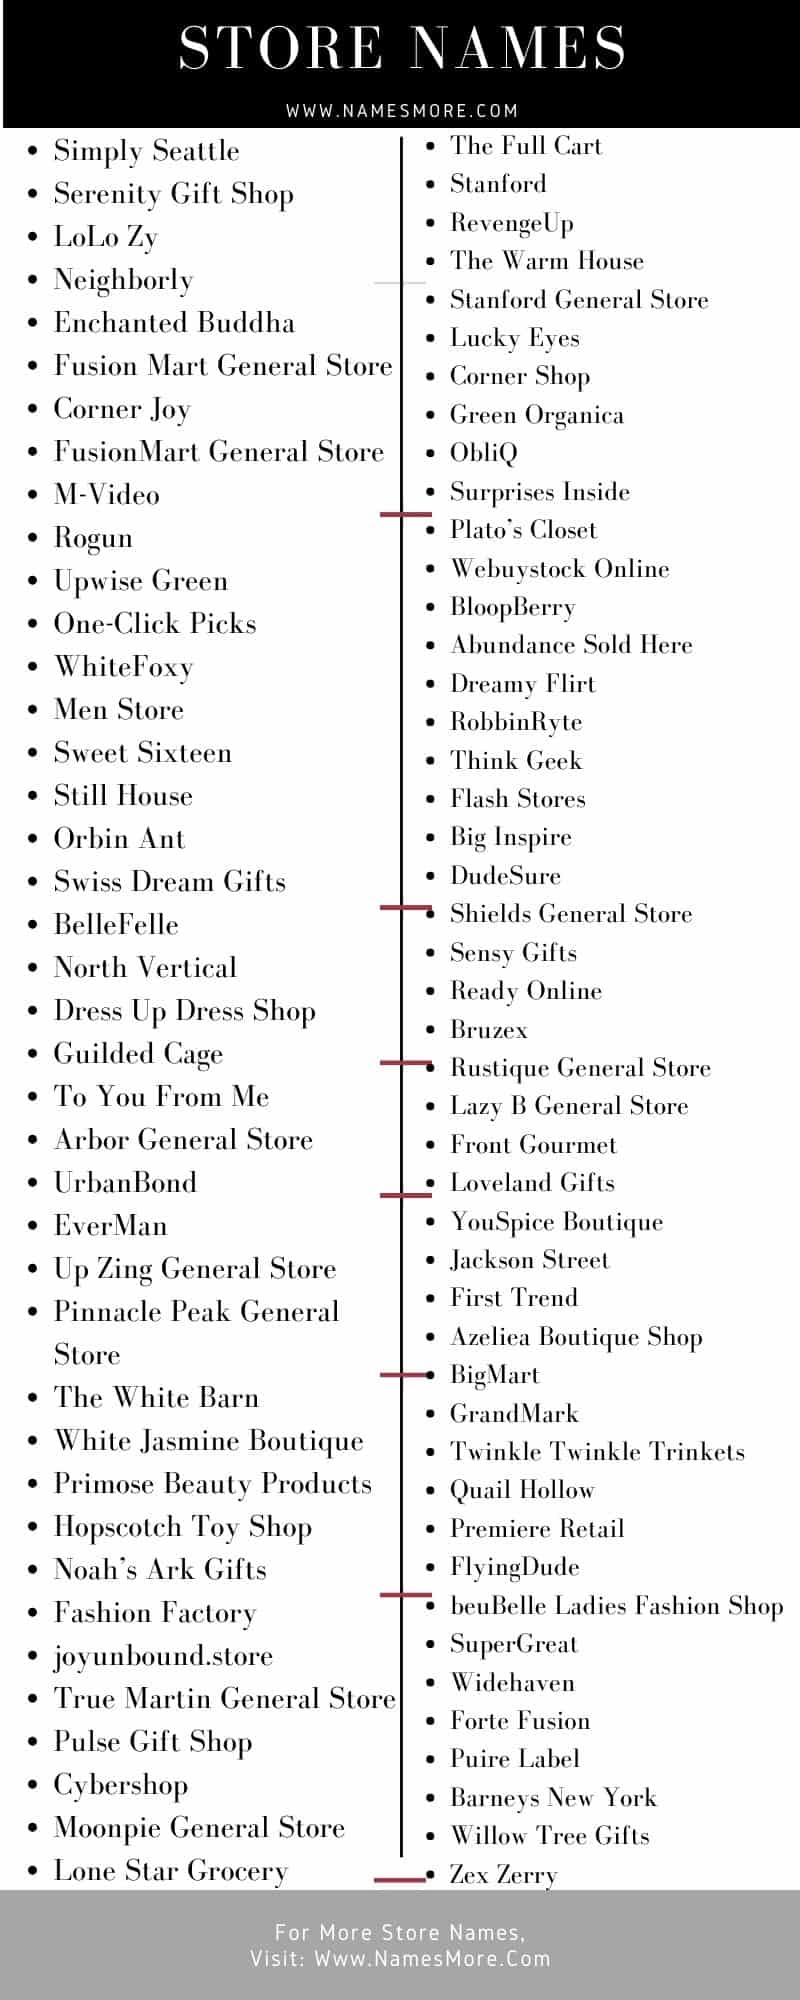 2800+ Store Names [Cool & Creative] List Infographic